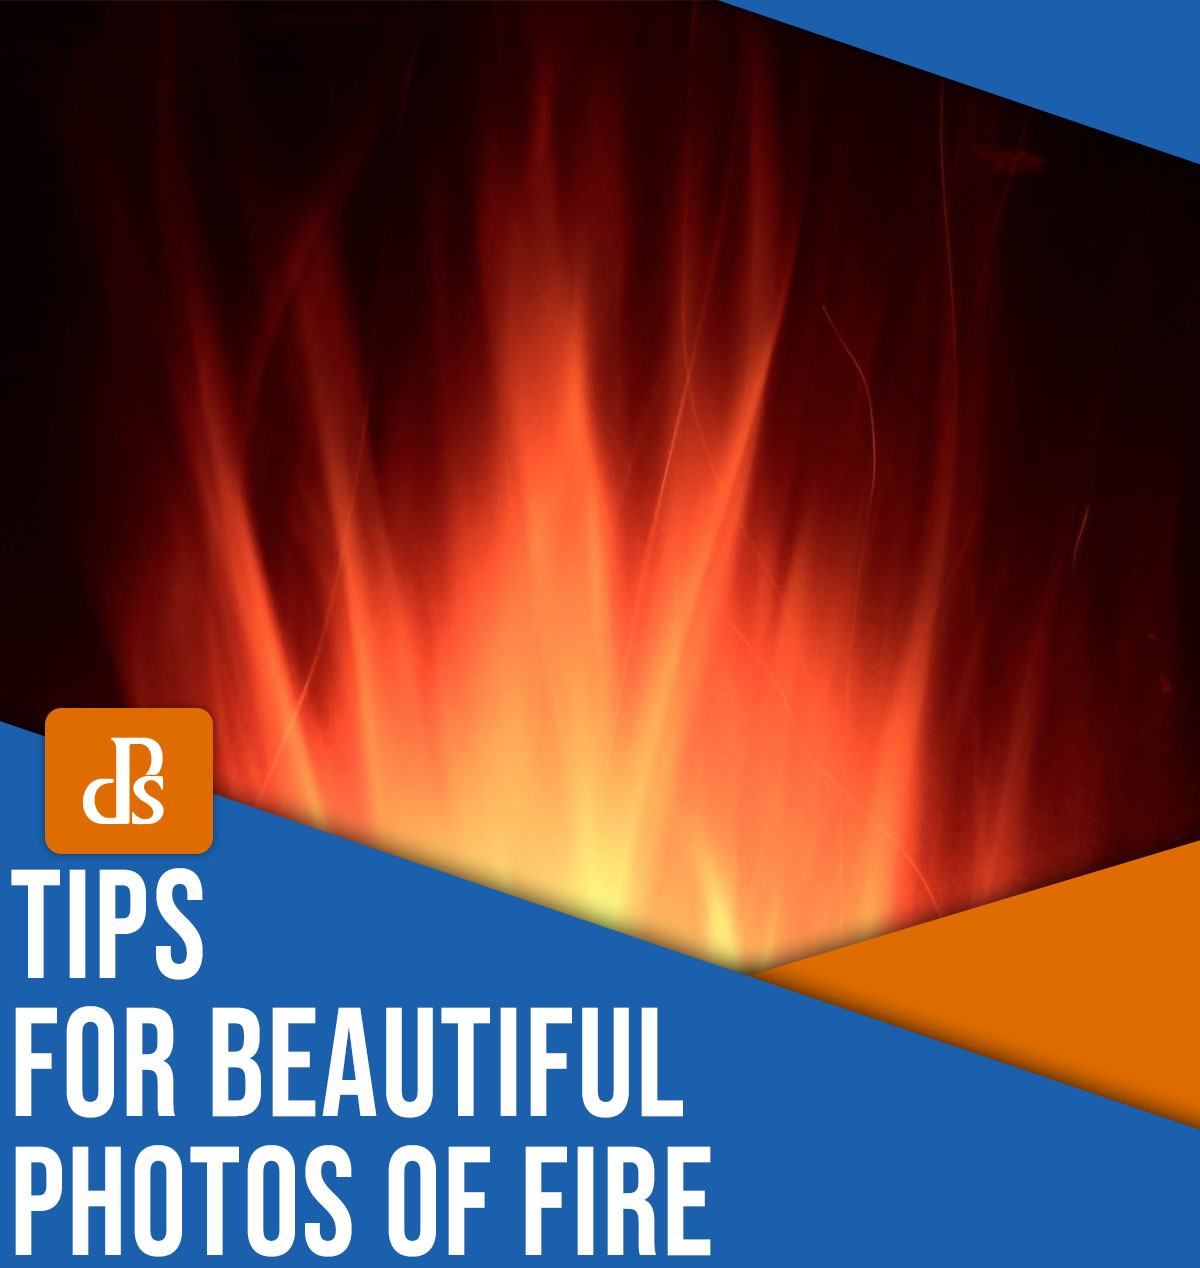 Tips for beautiful photos of fire